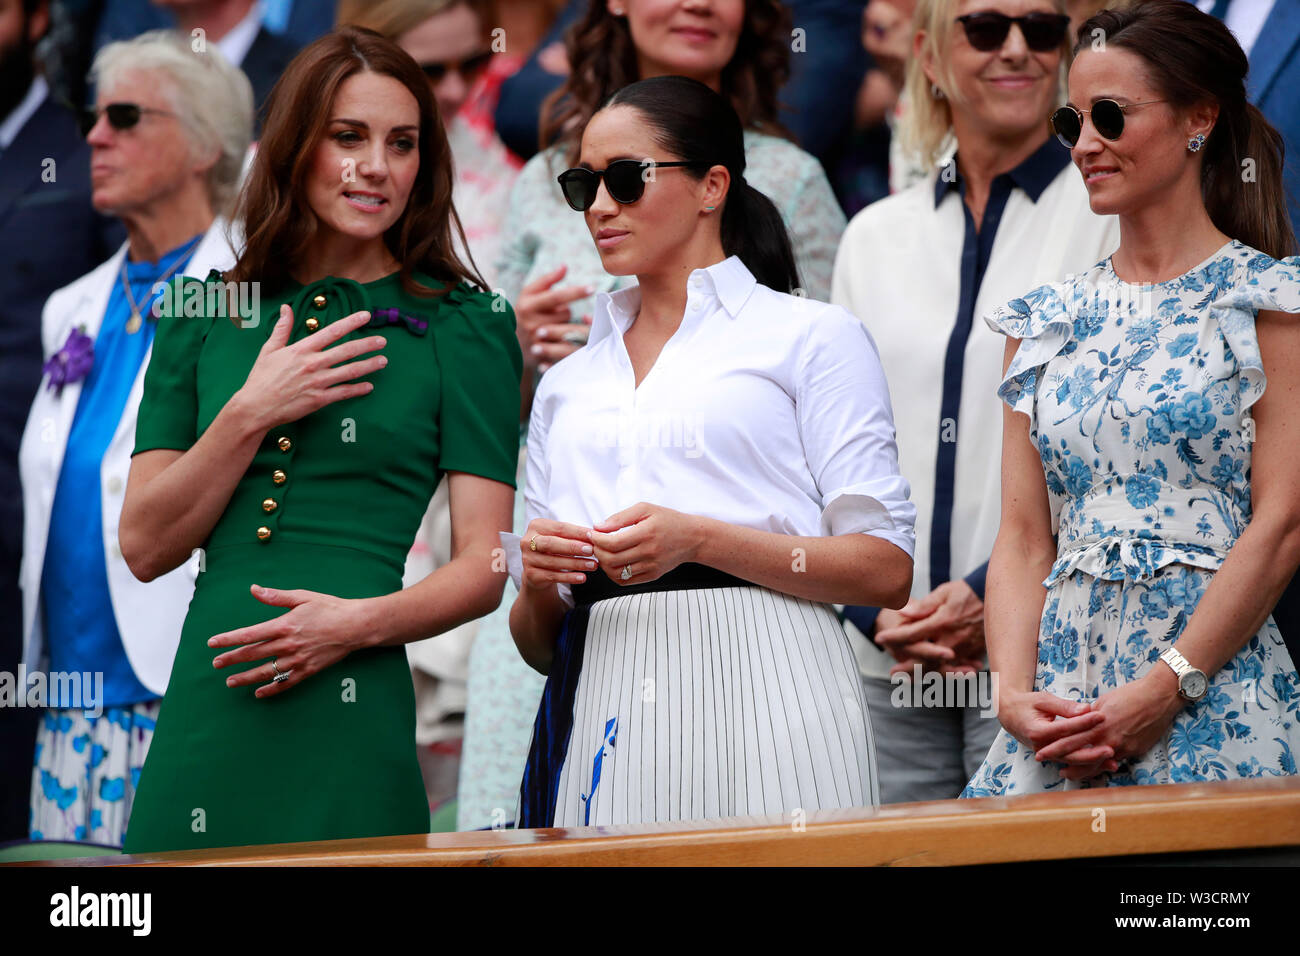 Wimbledon, London, UK. 13th July 2019. Kate Middleton (Duchess of  Cambridge) and Meghan Markle (Duchess of Sussex), Pippa Middleton watch the  Ladies Singles Final between Serena Williams and Simona Halep at The